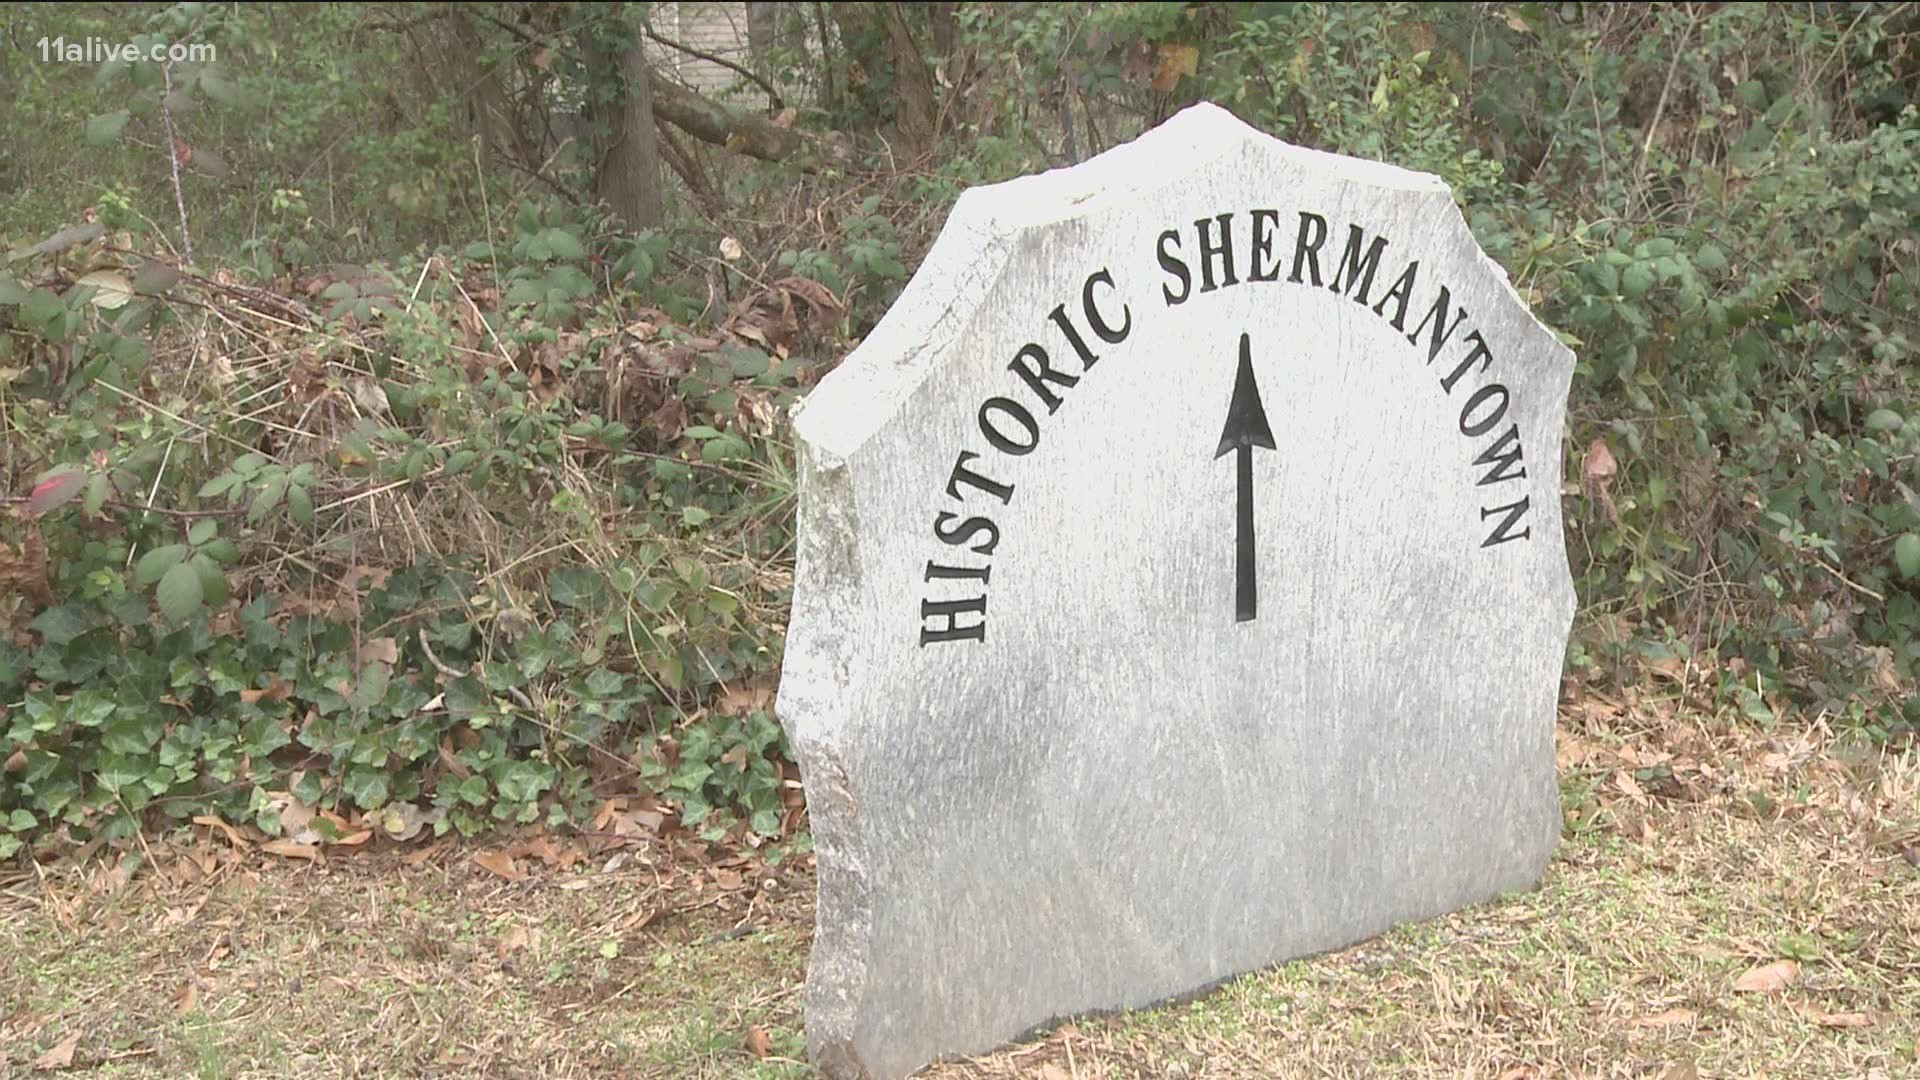 As we talk about changes coming to Stone Mountain Park to reflect its controversial past, a neighborhood close to the mountain is worried it's being forgotten.